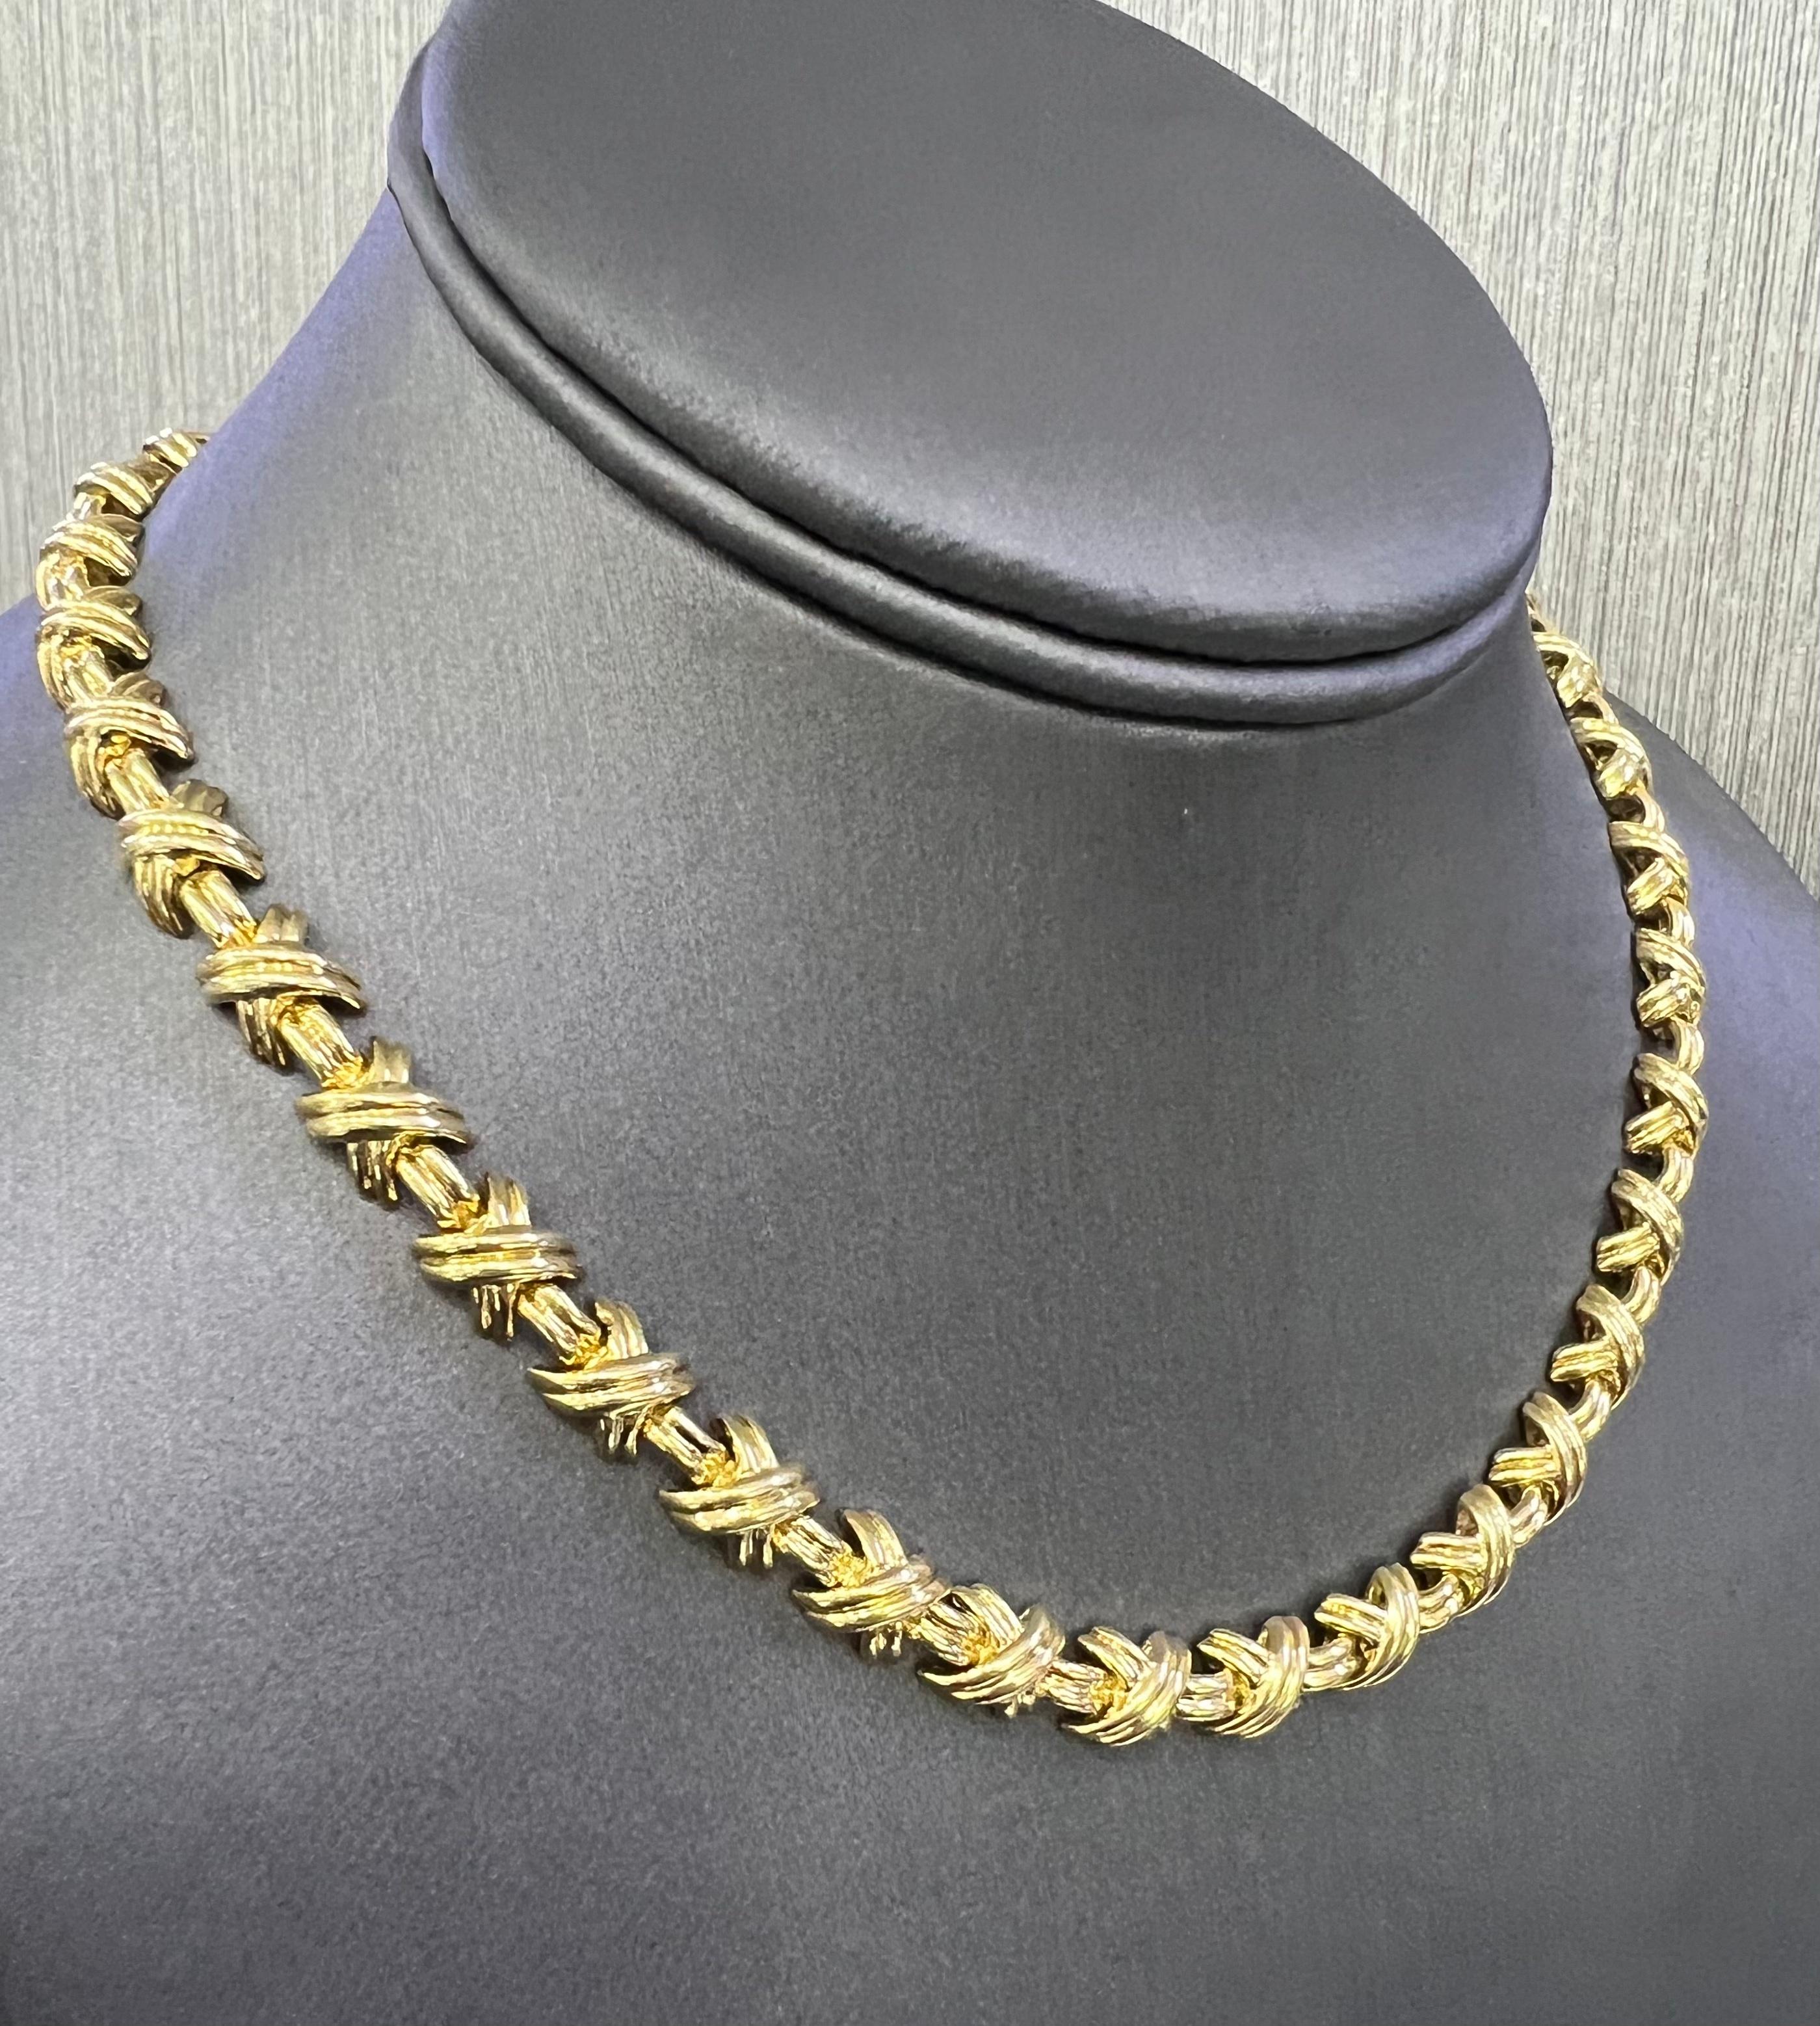 Women's or Men's Tiffany & Co. Vintage X Collar Necklace in 18k Yellow Gold For Sale